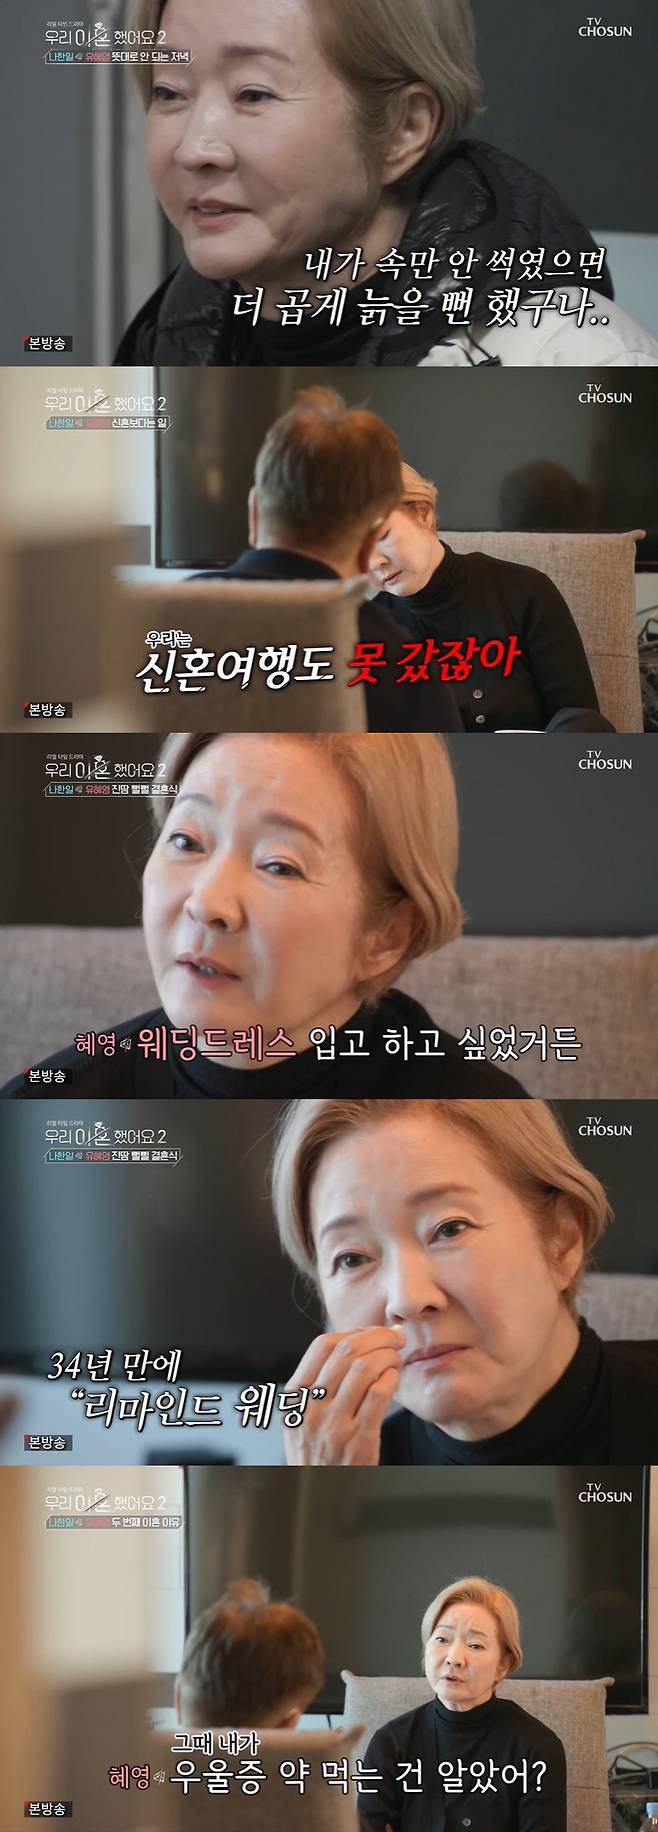 We Got Divorced Nihanil Yu Hye Young revealed why he did his second divorce.On the 15th TV Chosun entertainment program We Divorce 2, Nahan Il and Yu Hye Young confessed their second duty.Nahanil and Yu Hye Young went to dinner after a while of snowing. Nahanil said, I think I have more to eat this time than I have eaten alone while I am married.The next day, the two had breakfast and were openly confided in the second divorce.Yu Hye Young said, I did not let people who wanted to invest at that time, but then I could not hear it. I am not crazy.Nahanil had never done anything from a construction company to a film company to a mineral industry.Was that (business failure) the biggest reason? asked Nahanil, and Yu Hye Young nodded.Yu Hye Young said, Did you know I was eating depression medicine? It was difficult for me to be mentally and economically.I feel sorry and wrong, but when I was living a hard life (in prison), I did not have a chance, Nahan said. The lawyer came.I cant forget what I saw in court. I sat in front of the judge in my prison suit.But he signed Baro. I wondered what kind of strong heart you had to do that then, asked Nahanil, who said, I was invested before the company went down.You did not know how the money was spent or what was wrong. I did not have enough money to give to investors, so I received your autograph. The result is too ridiculous. Is not it a debt you owe once? I did not pay it back and you went in. Nahanil, who had lunch outdoors, said, I did not plan everything alone to cast you when you were very famous. I first saw you at a wedding fashion show.It was then stuck, said Confessions for the first time, who later recommended Yu Hye Young when he was recommended for casting.Yu Hye Young also showed interest in Nahanil while filming Drama, and Nahanil, who noticed it, became engaged to Baro.Youre so urgent - you should not have done it then, Yu Hye Young, who was talking about his first meeting, revealed.